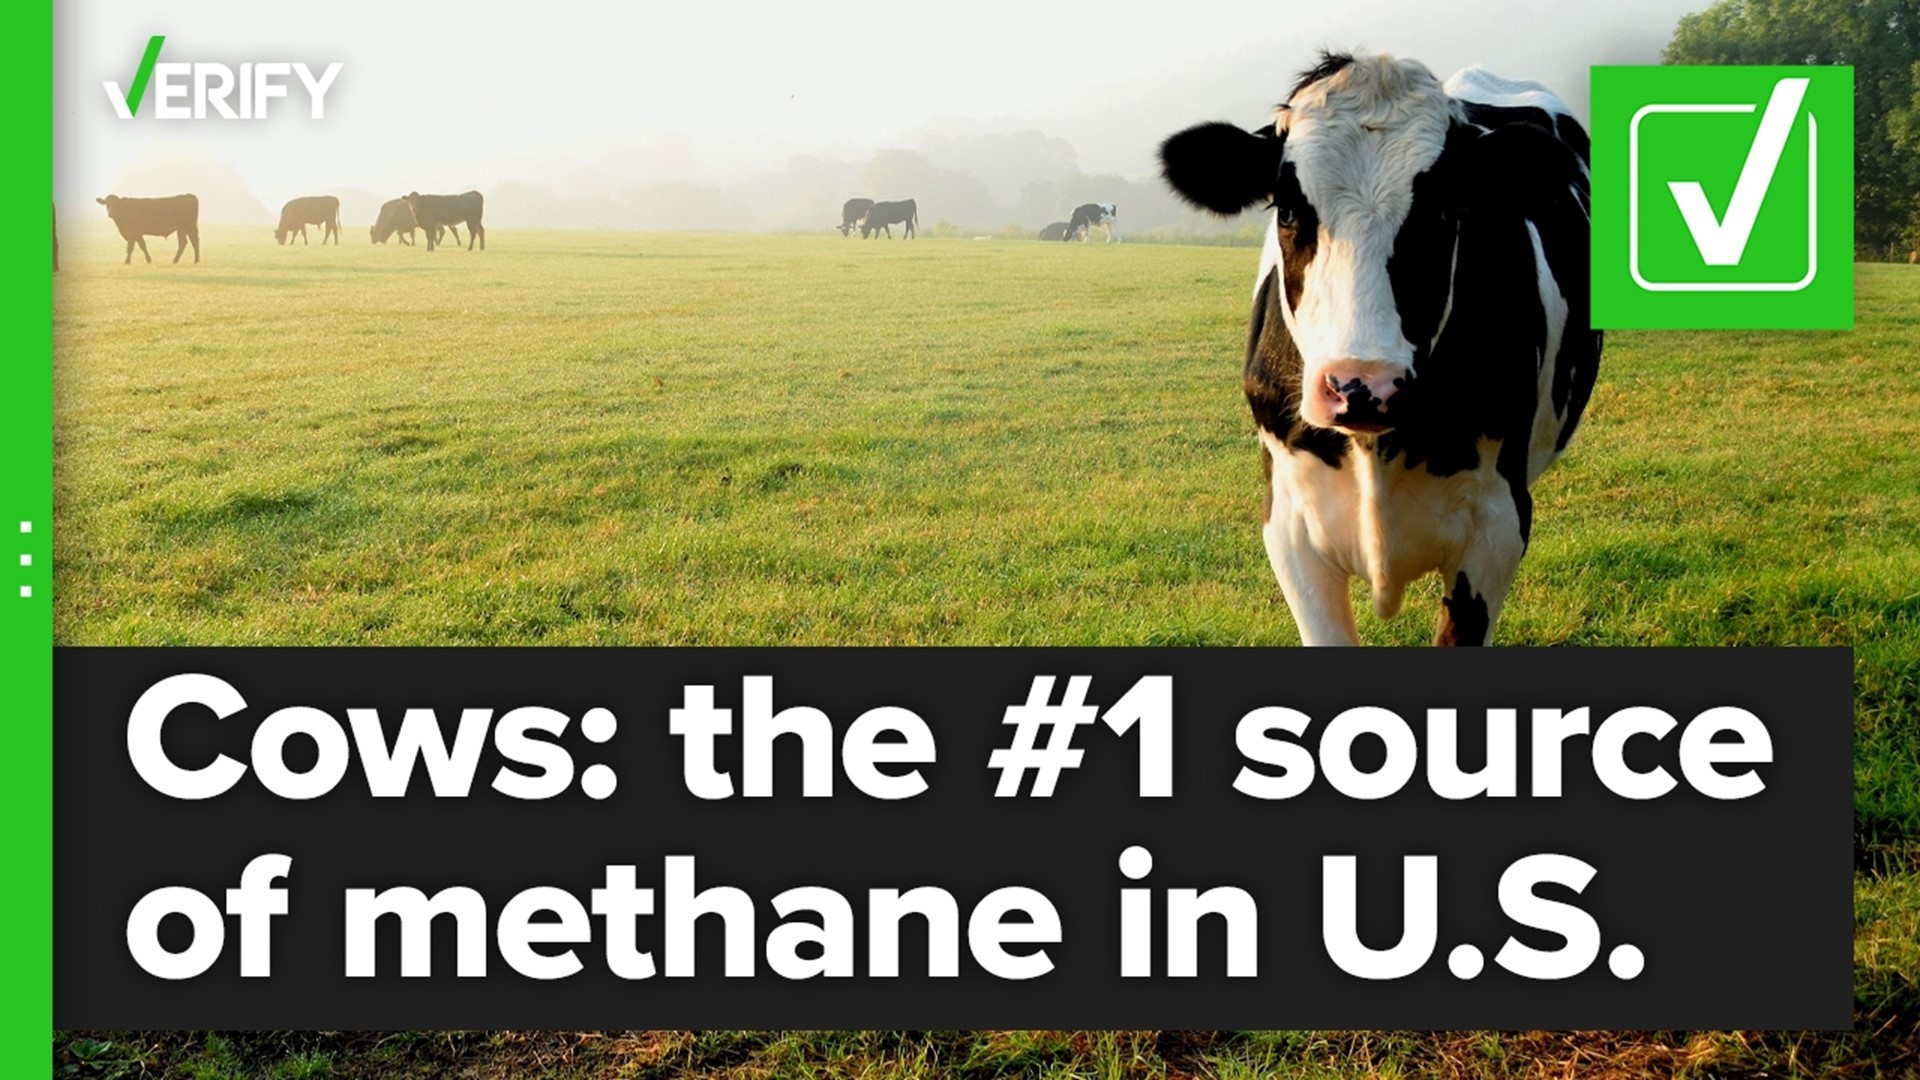 Methane is produced as a part of cattle’s digestive process, and cow burps are full of it. That’s what makes cattle a major contributor of U.S. methane emissions.